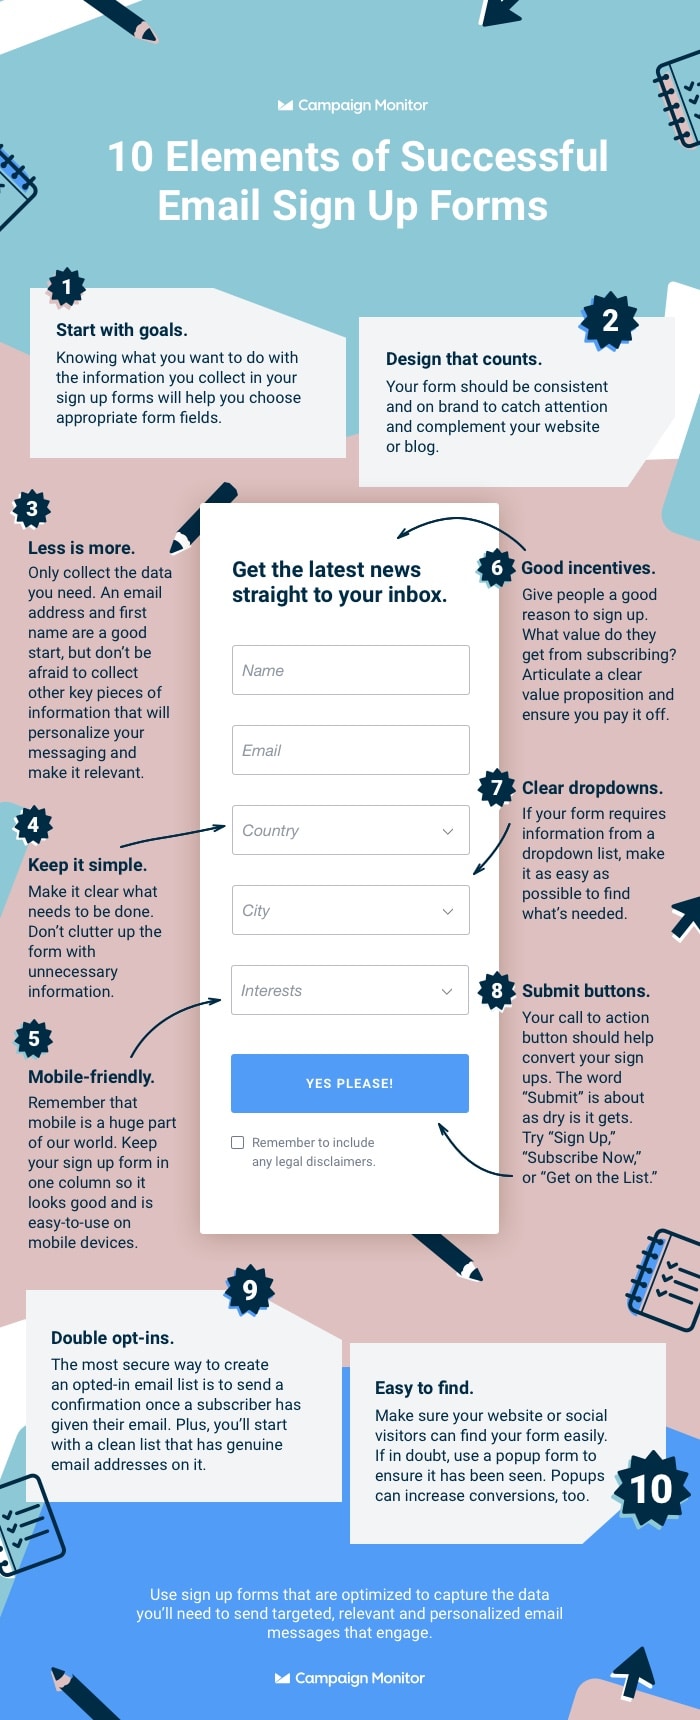 10 Elements of Successful Email Sign Up Forms - Infographic by Campaign Monitor